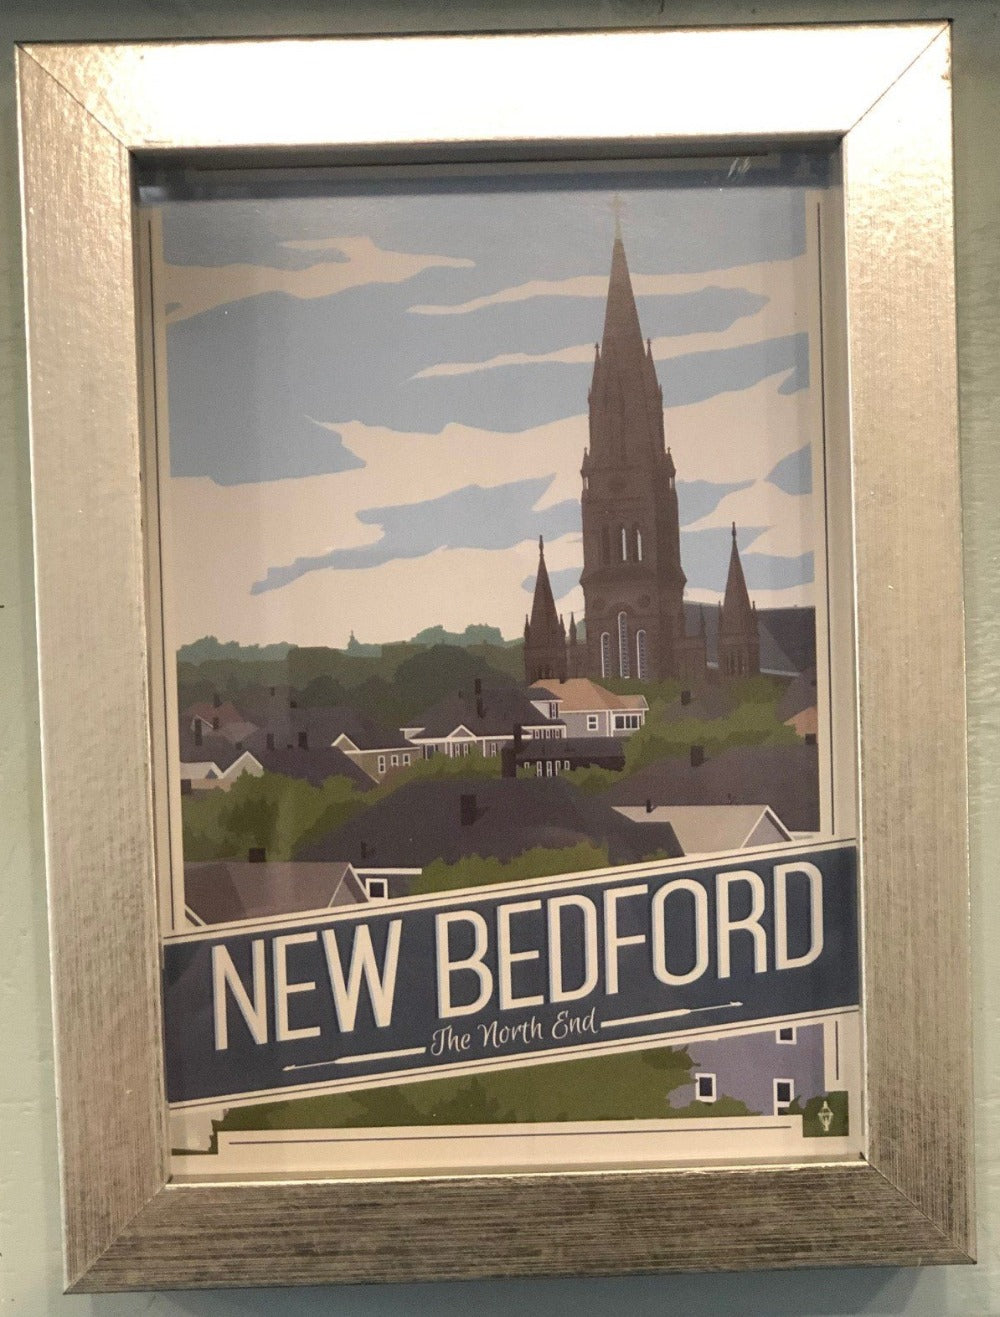 New Bedford Post Card, North End